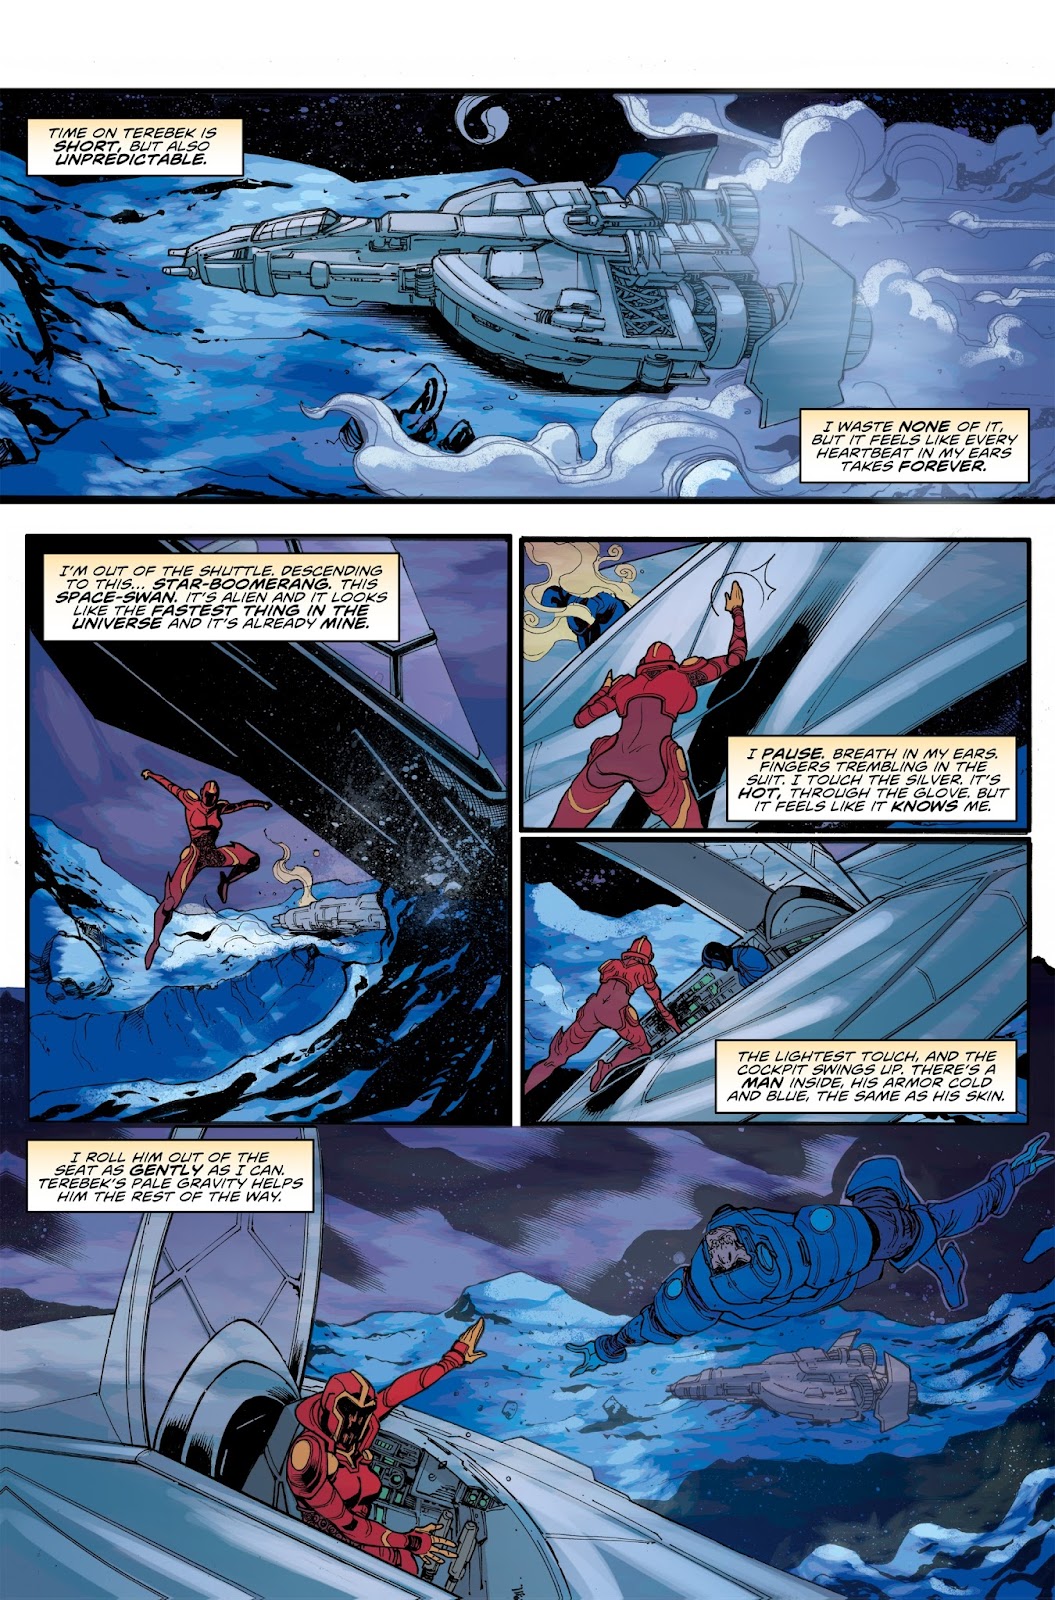 Doctor Who: Special issue 2 - Page 22